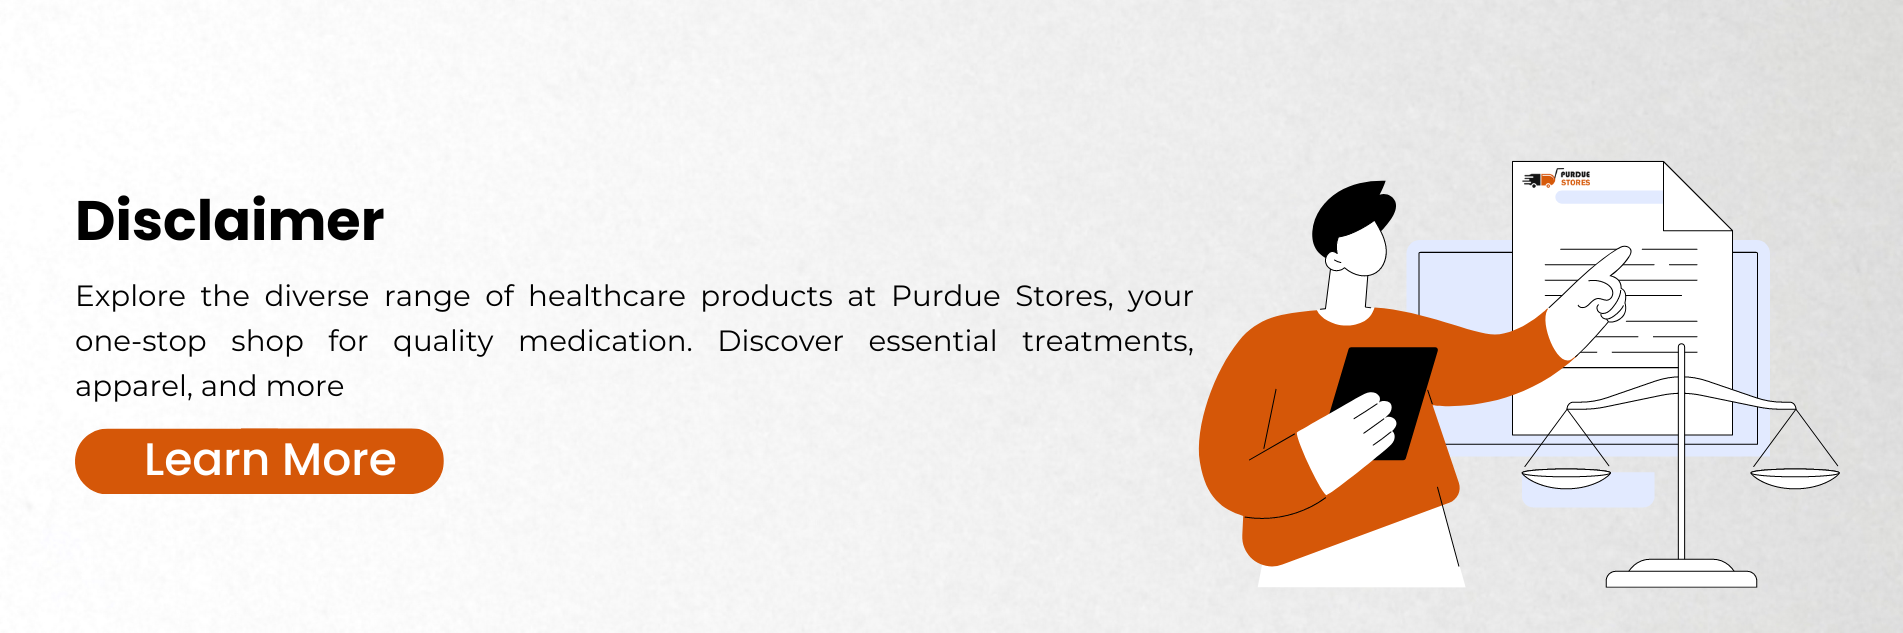 Disclaimer from purdue stores